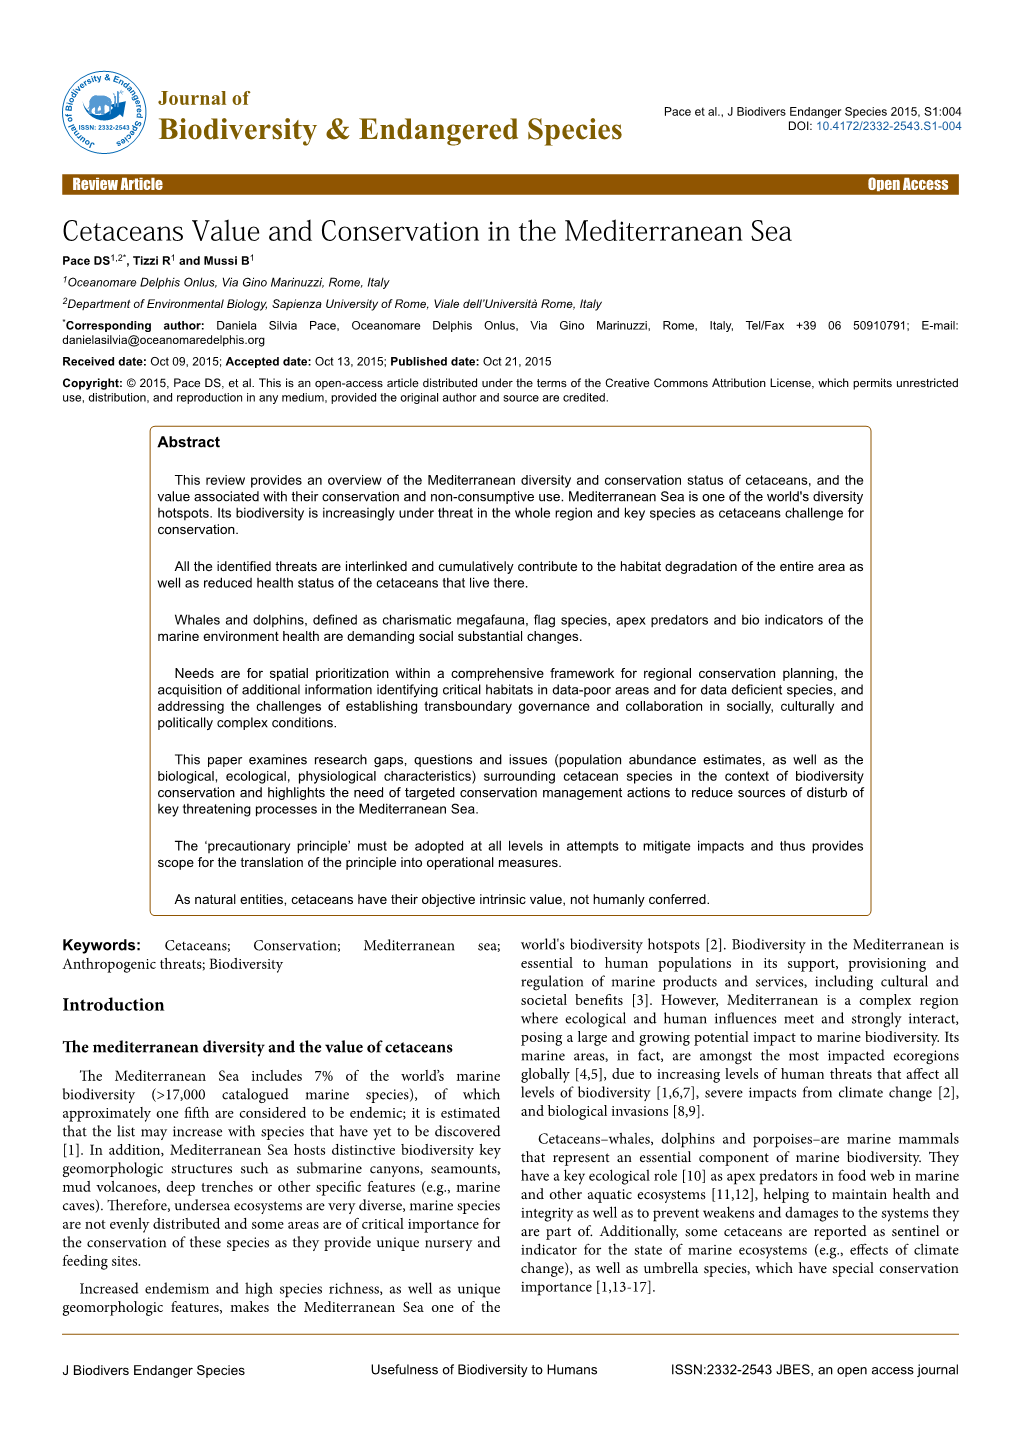 Cetaceans Value and Conservation in the Mediterranean